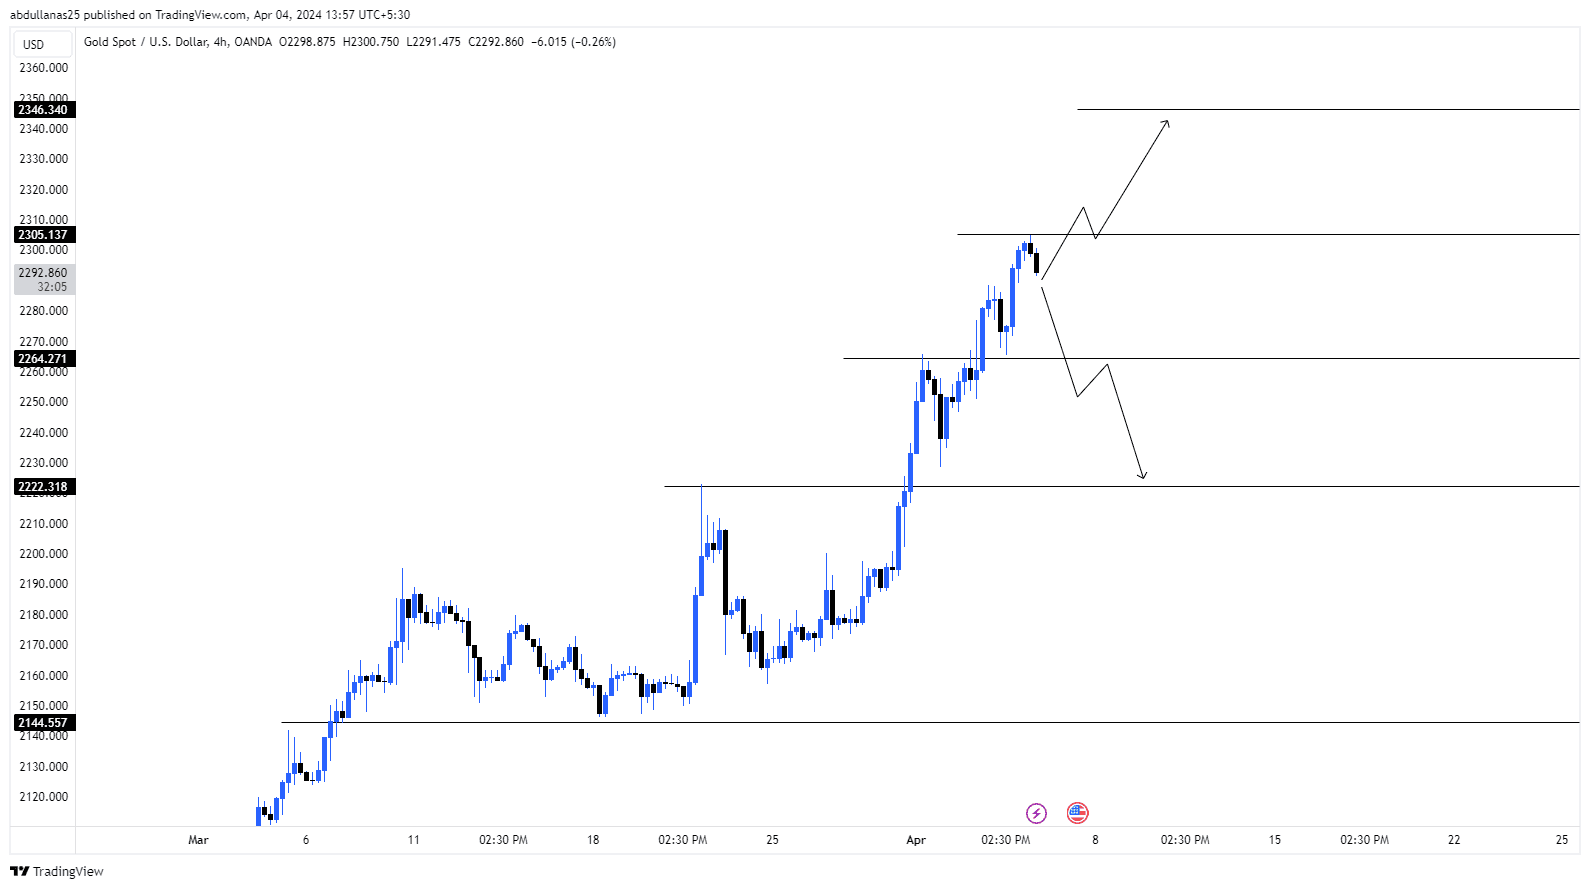 GOLD MAKING ALL TIME HIGH AGAIN,2800$ INCOMING?